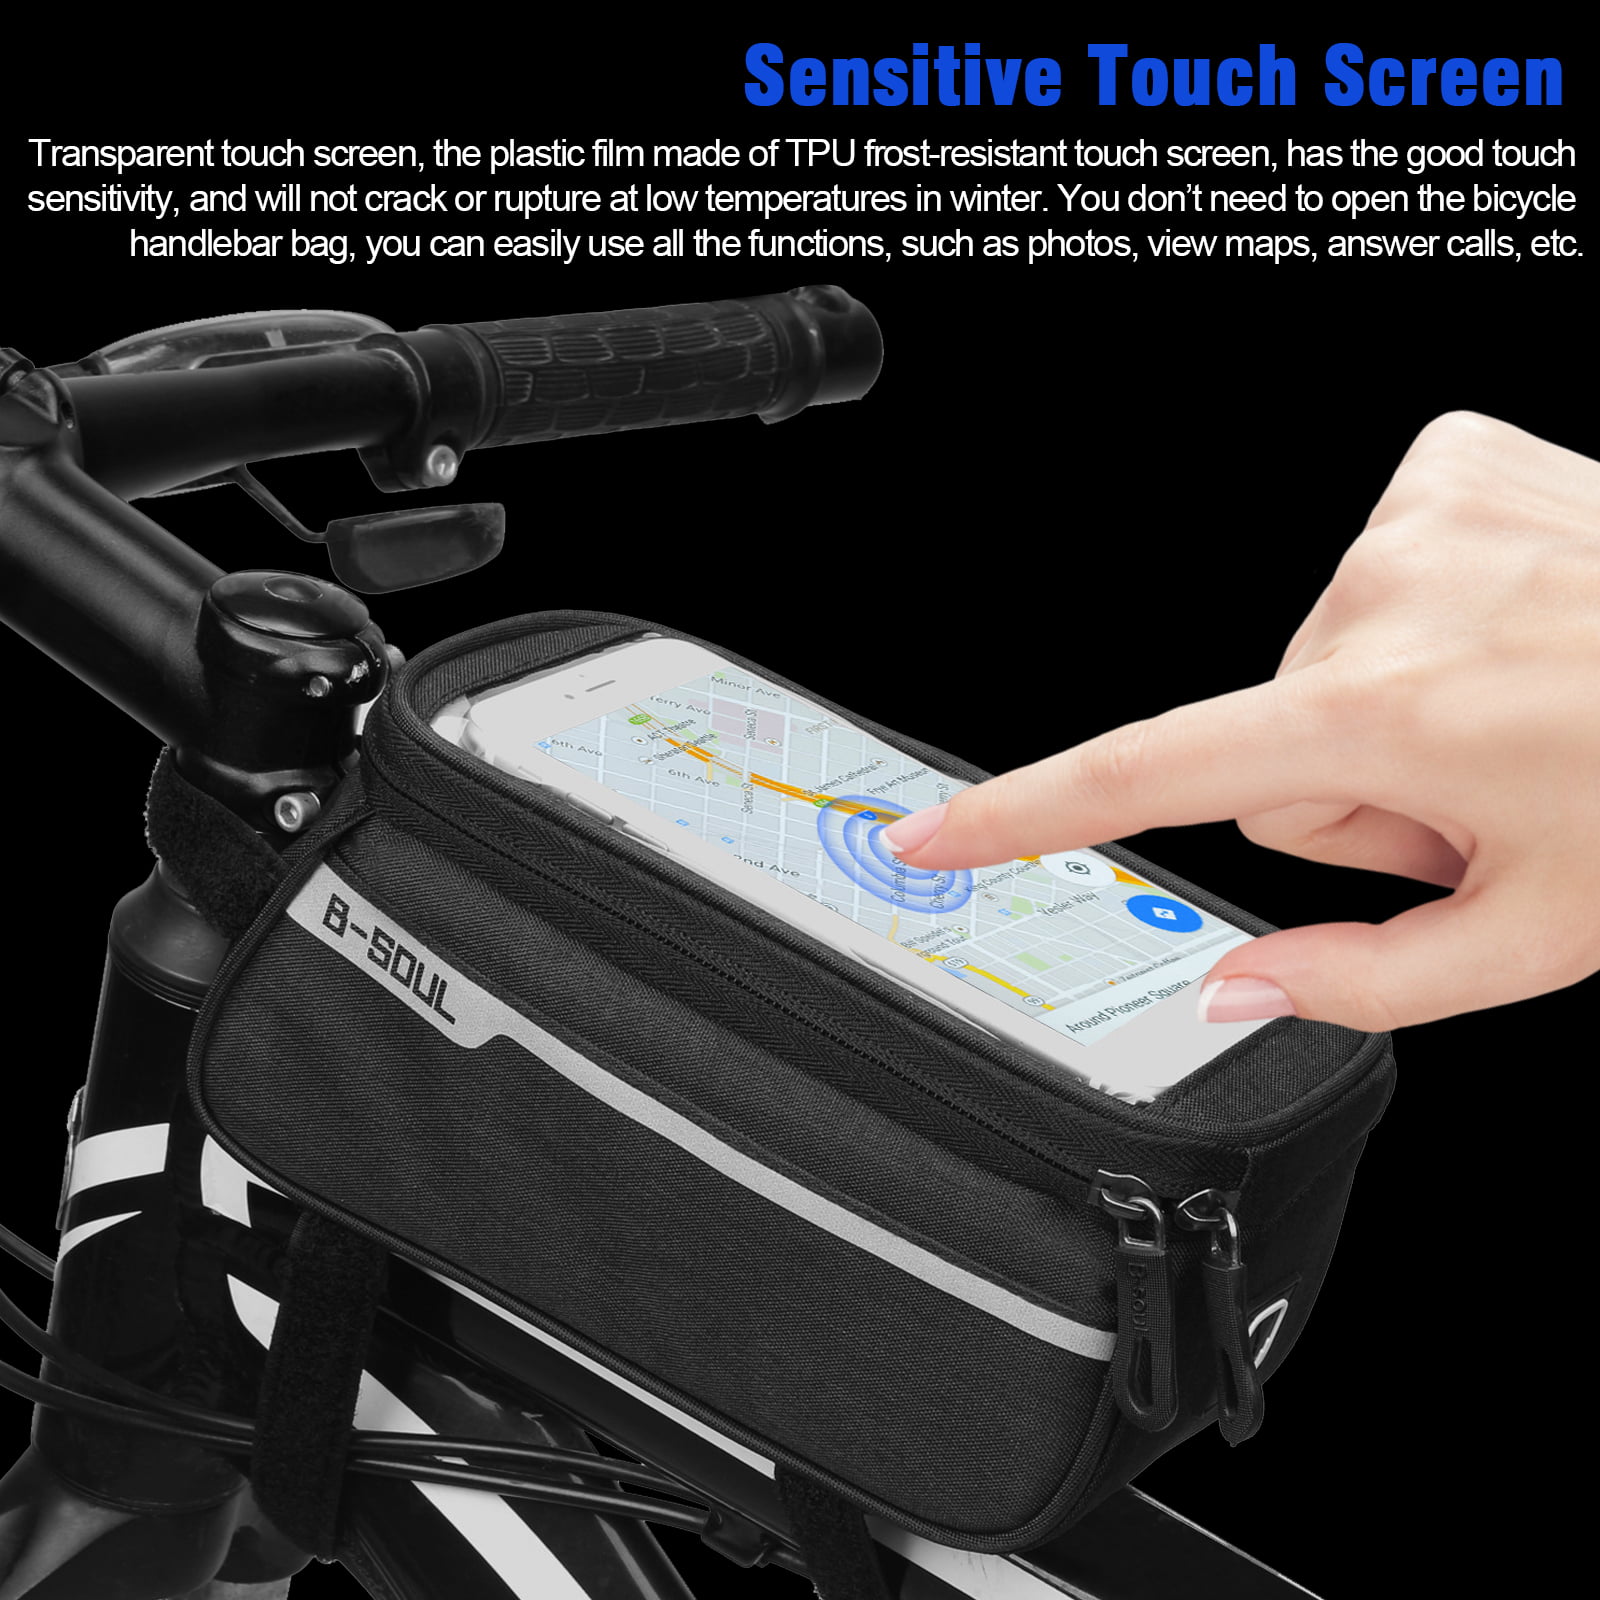 Eslnf Bike Phone Front Frame Bag Handlebar Bag Waterproof Bicycle Top Tube Phone Mount Pack Cycling Pouch Mobile Phone Holder Bike Accessories for All Android/iPhone Cellphones 